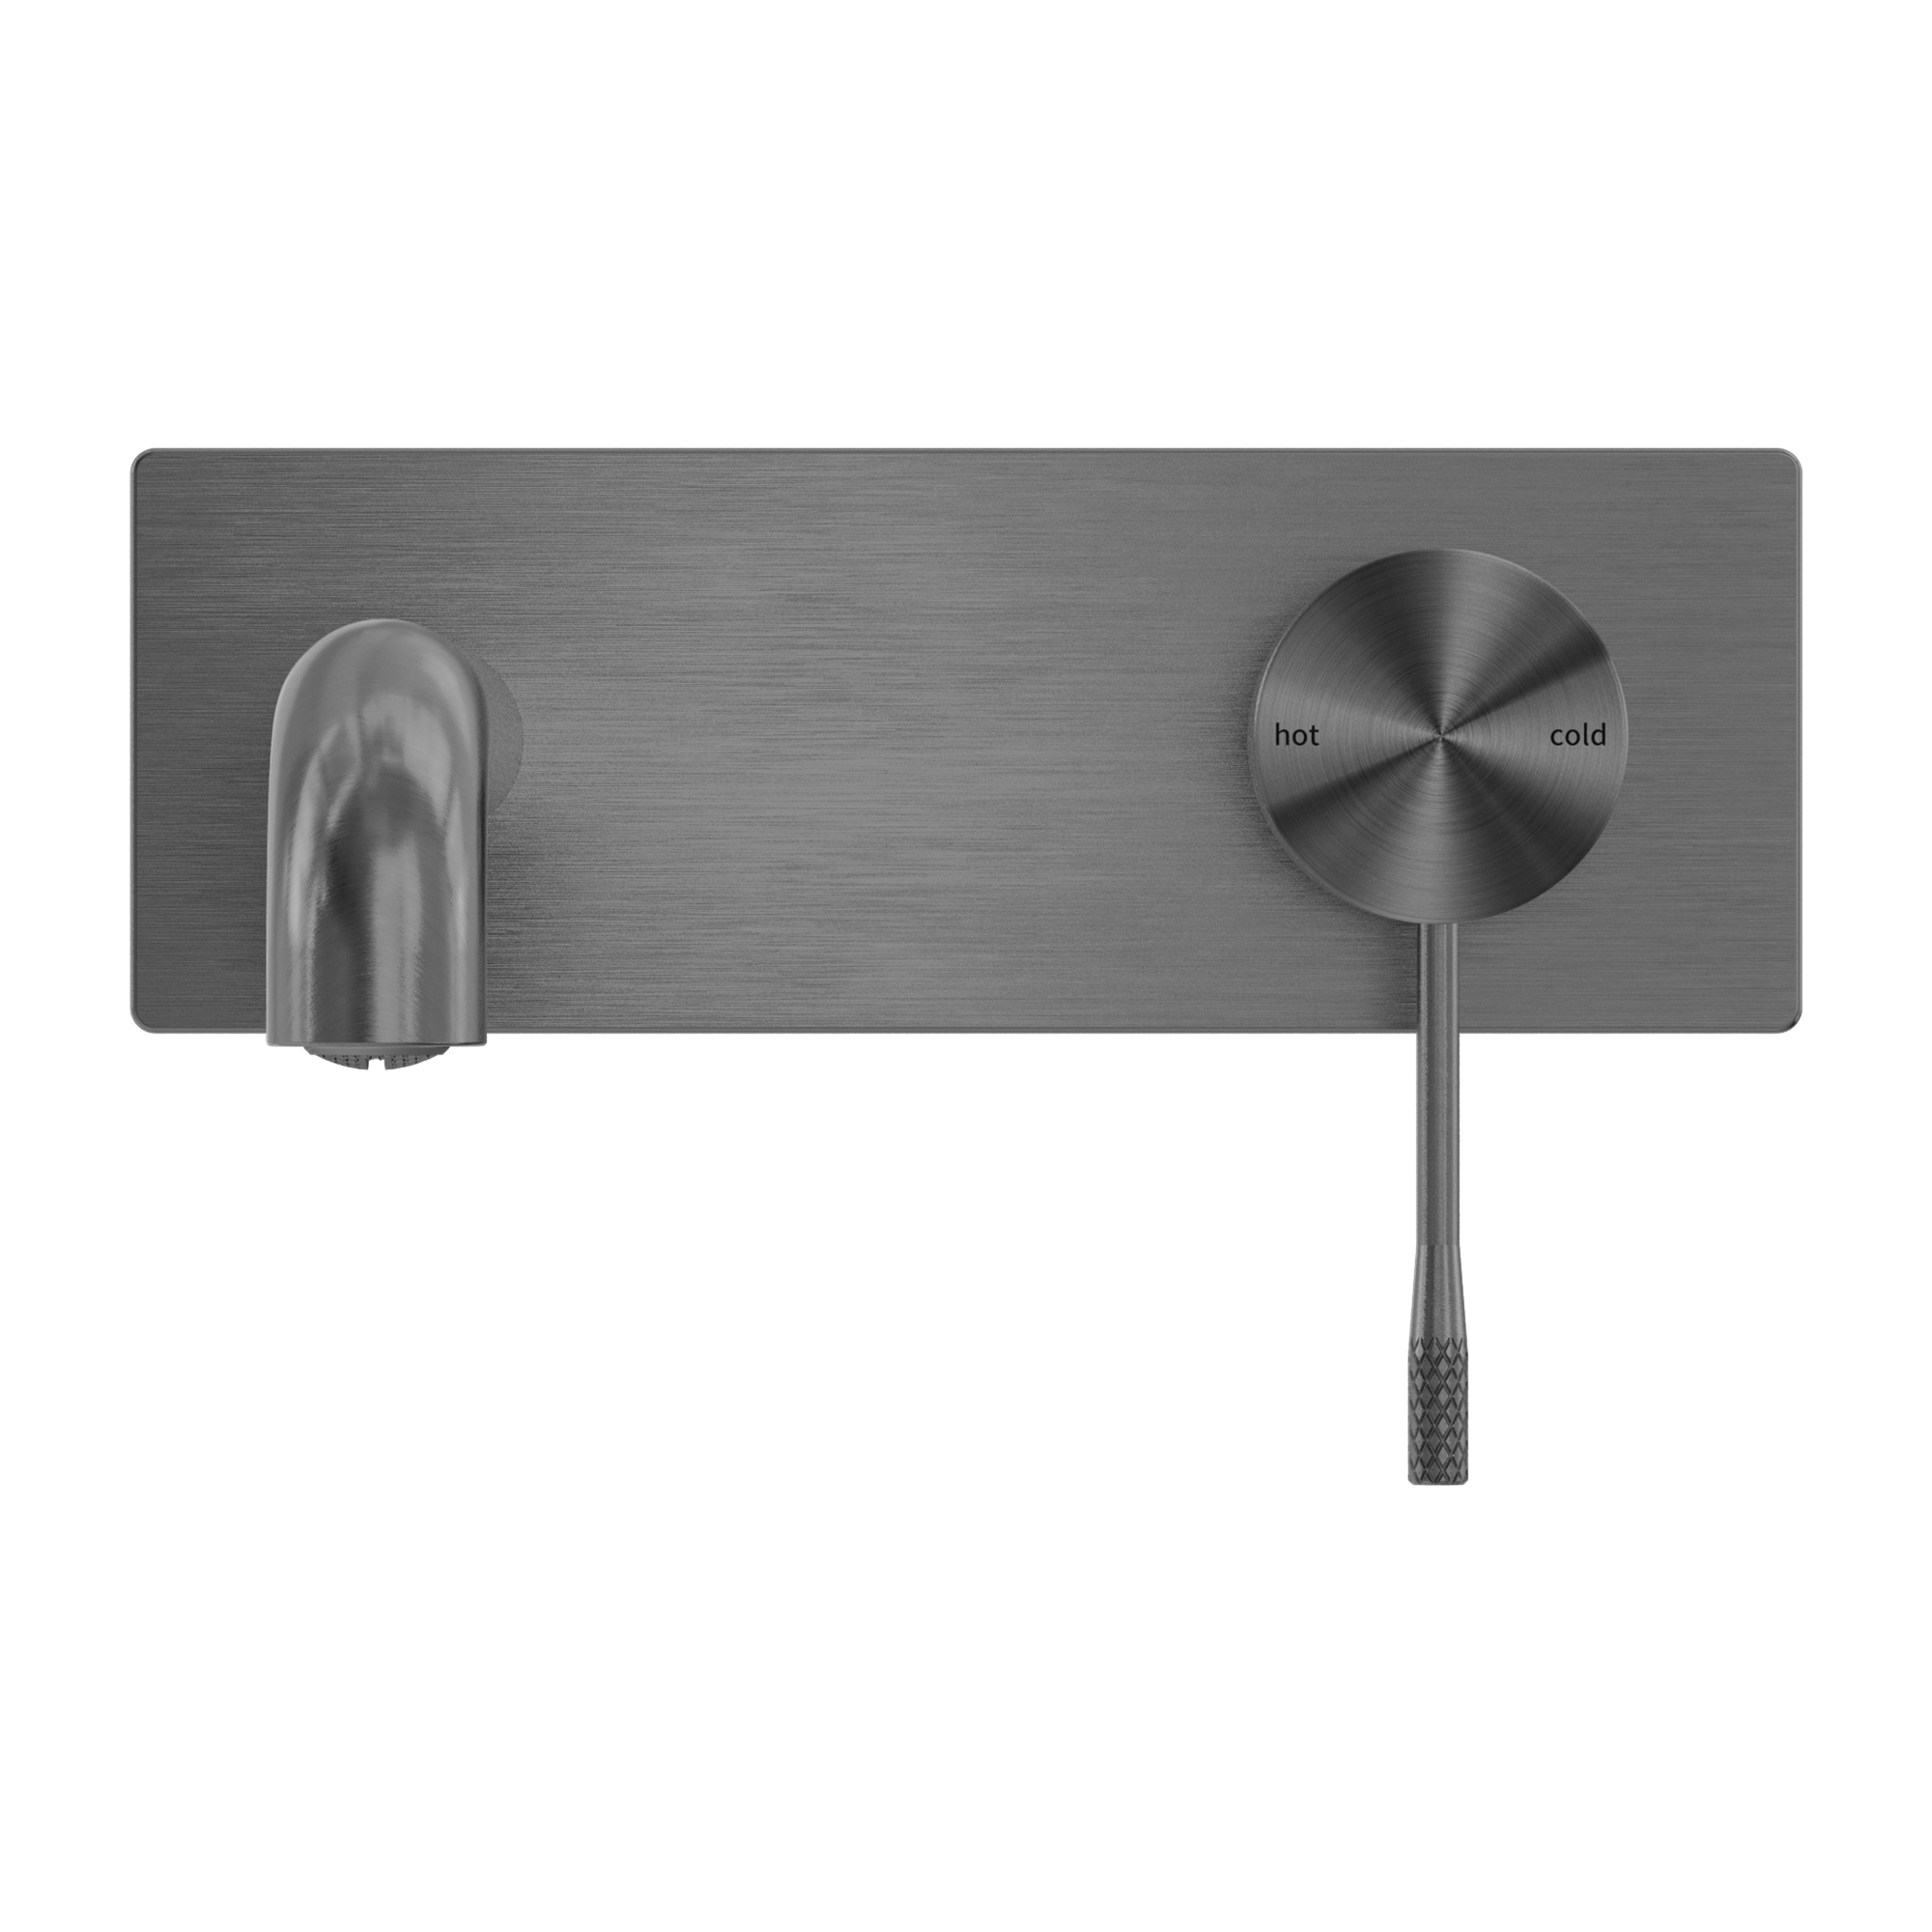 NERO OPAL WALL BASIN/ BATH MIXER GRAPHITE (AVAILABLE IN 120MM, 160MM, 185MM, 230MM AND 260MM)